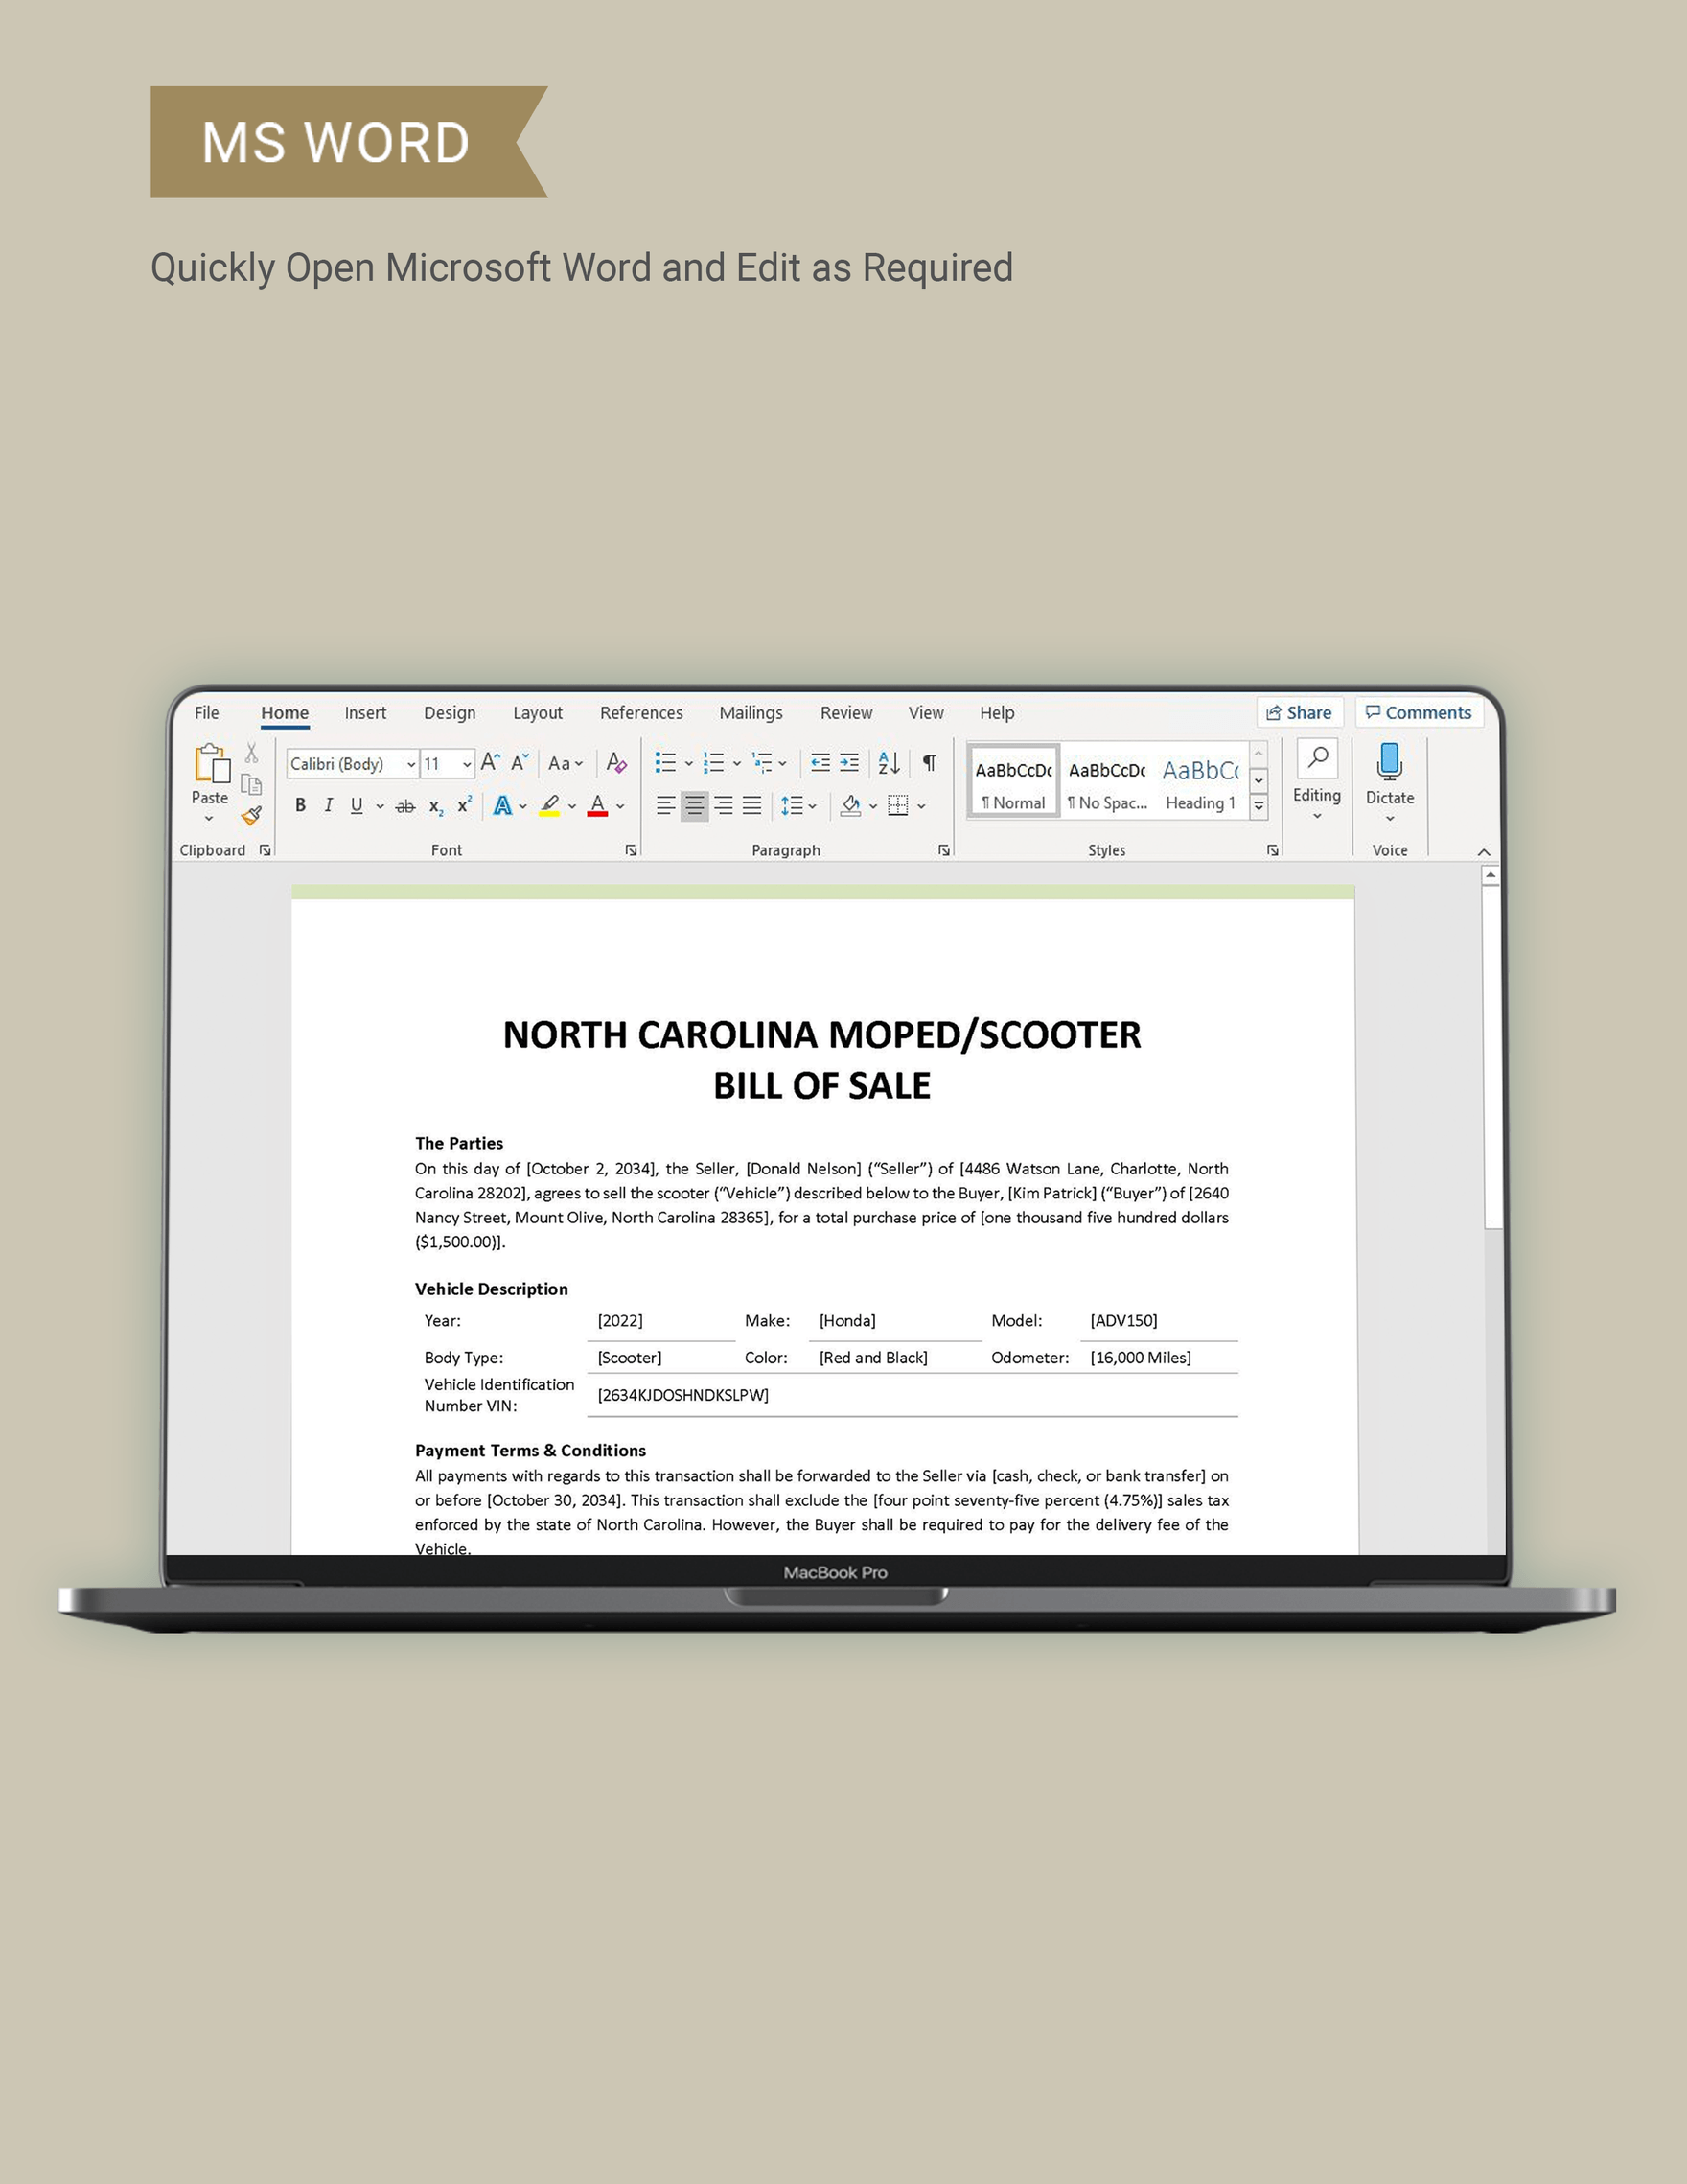 North Carolina Moped / Scooter Bill of Sale Template